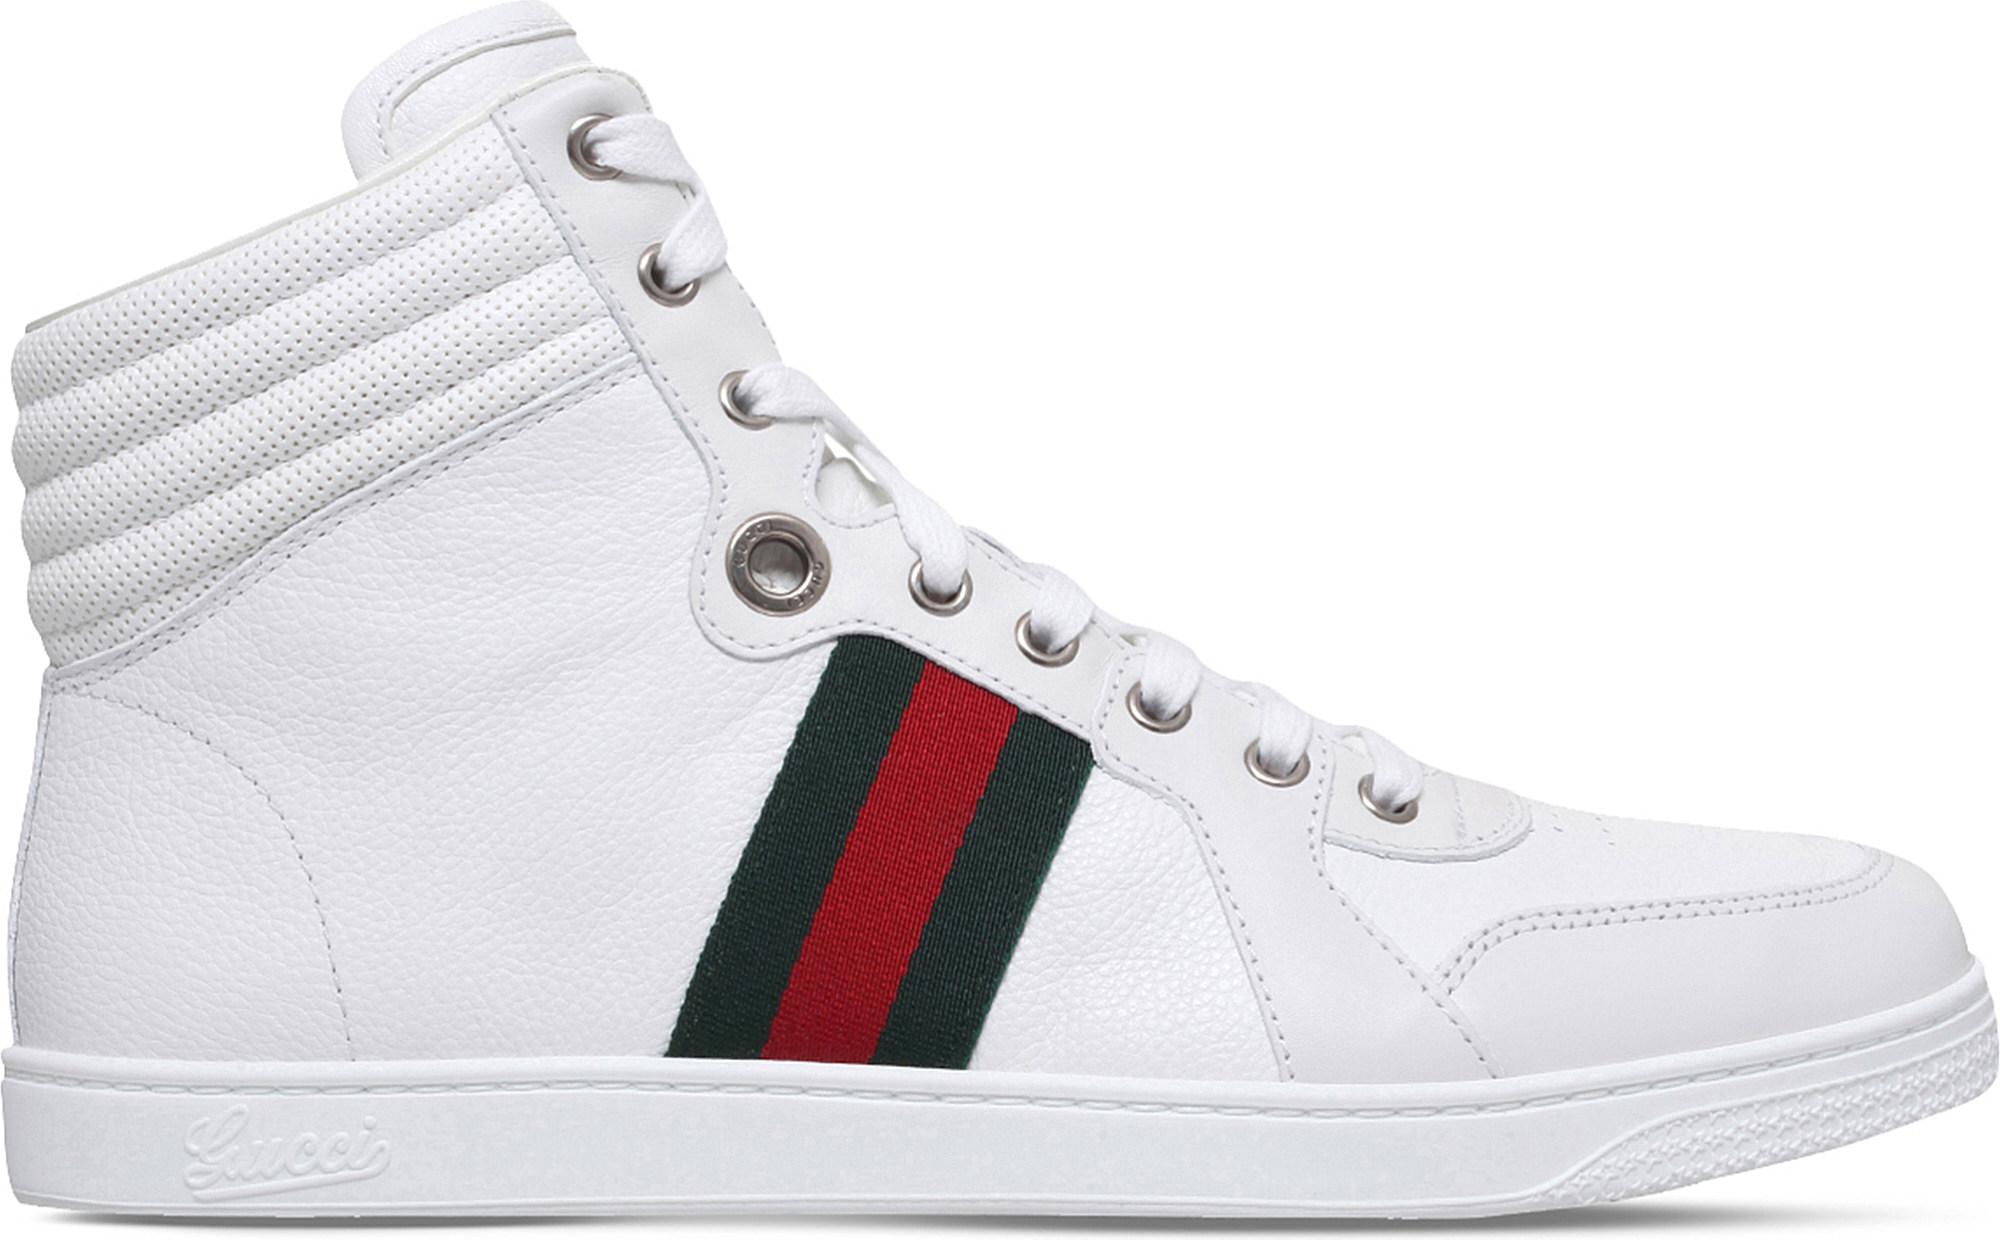 Lyst - Gucci Coda Striped Leather Trainers in White for Men